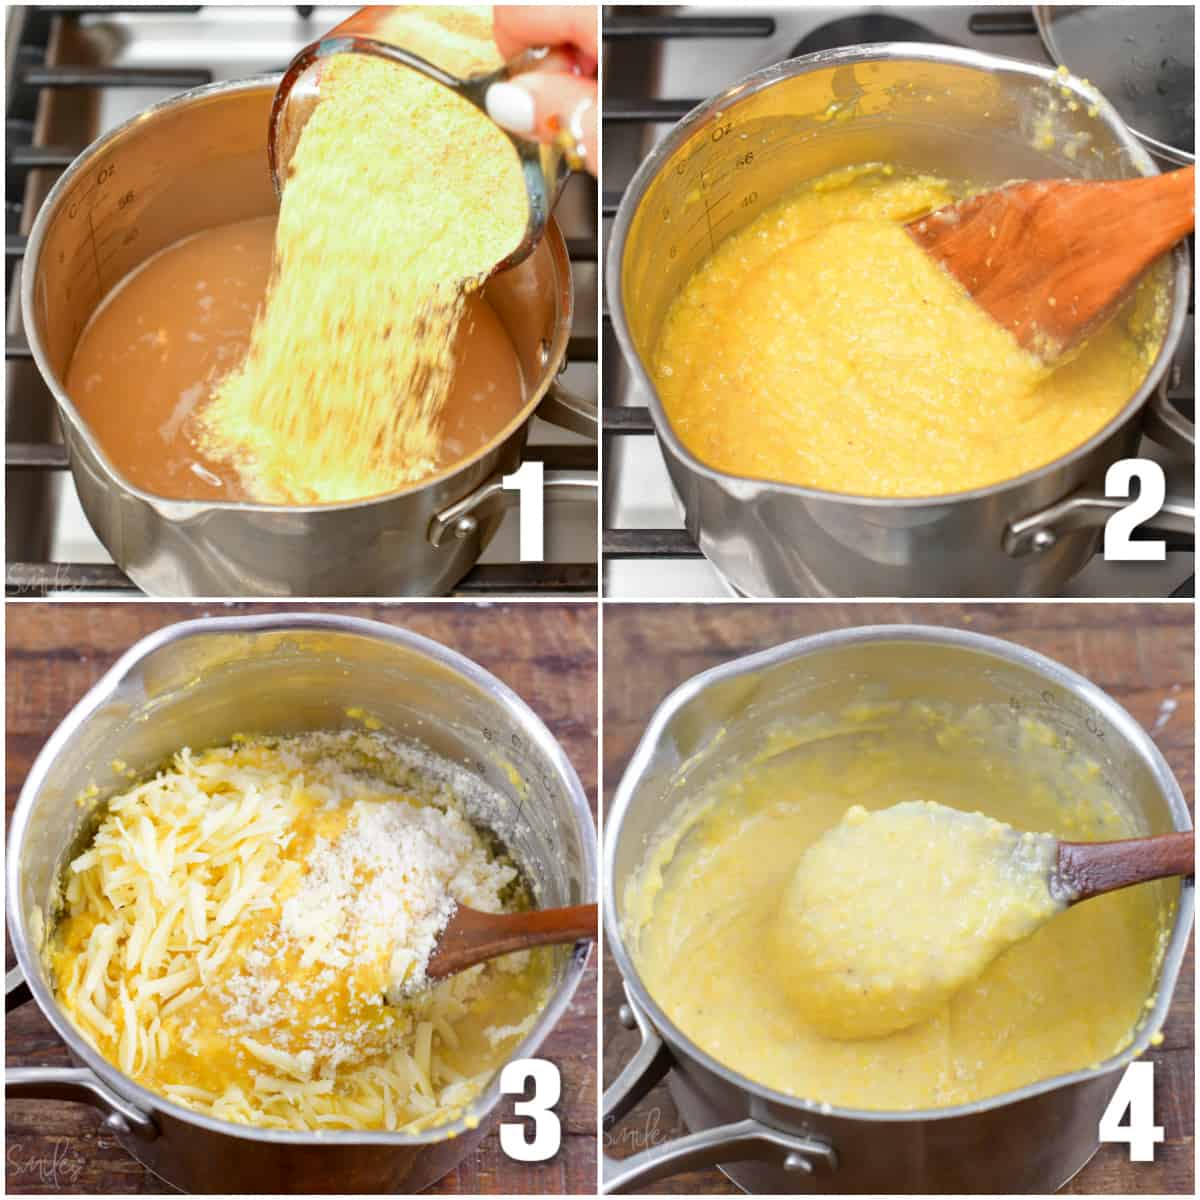 collage of four images showing steps to make grits in a silver bowl and mixing grits and cheese.